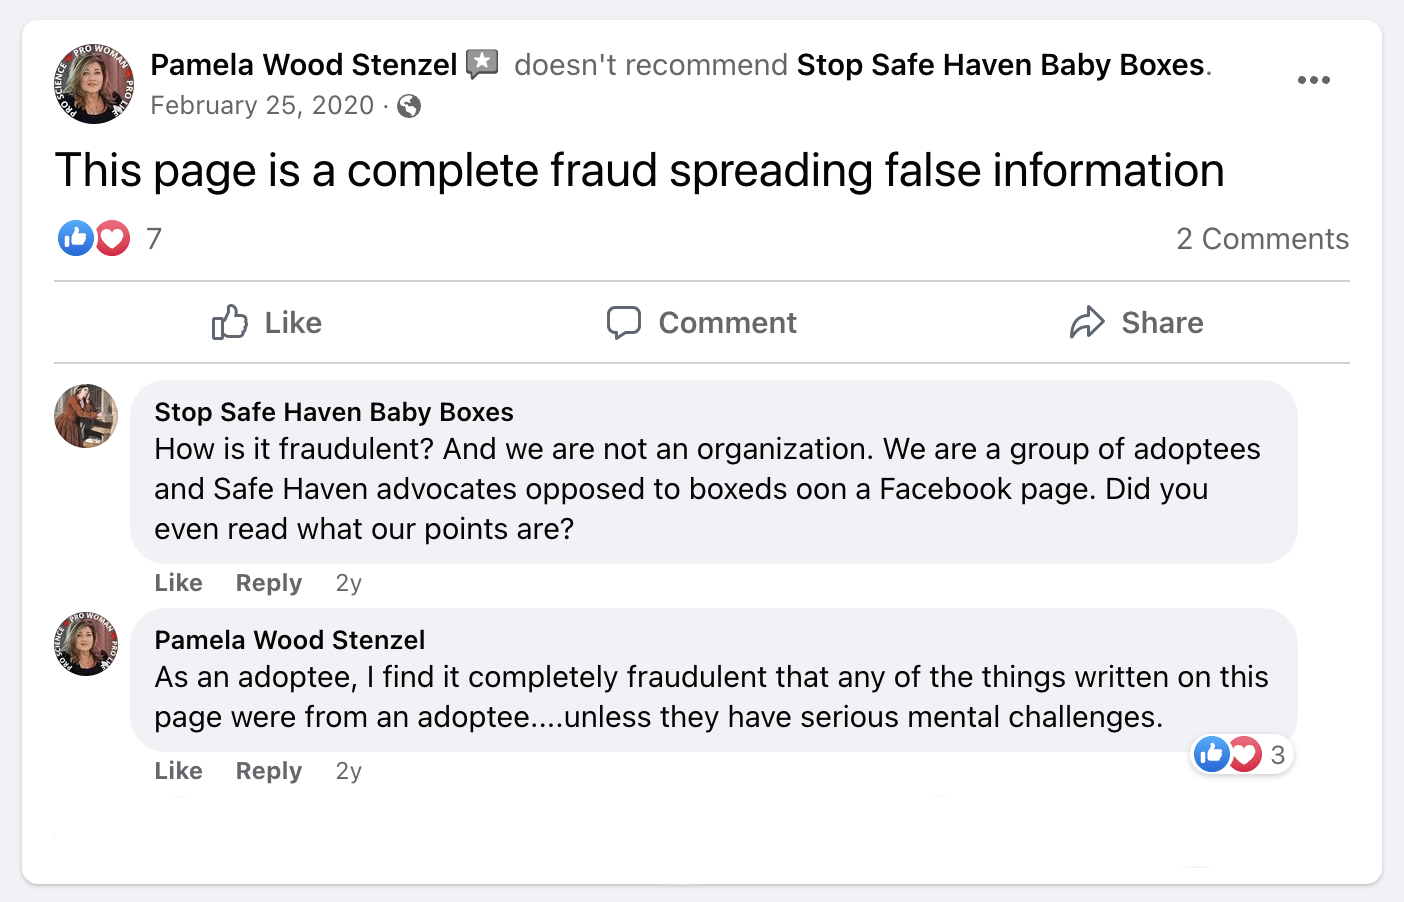 Screenshot of Pamela Wood Stenzel's review of the Facebook page of Stop Safe Haven Baby Boxes, in which she says "Pamela Wood Stenzel doesn't recommend Stop Safe Haven Baby Boxes. February 25, 2020. This page is a complete fraud spreading false information.

As an adoptee, I find it completely fraudulent that any of the things written on this page were from an adoptee....unless they have serious mental challenges."